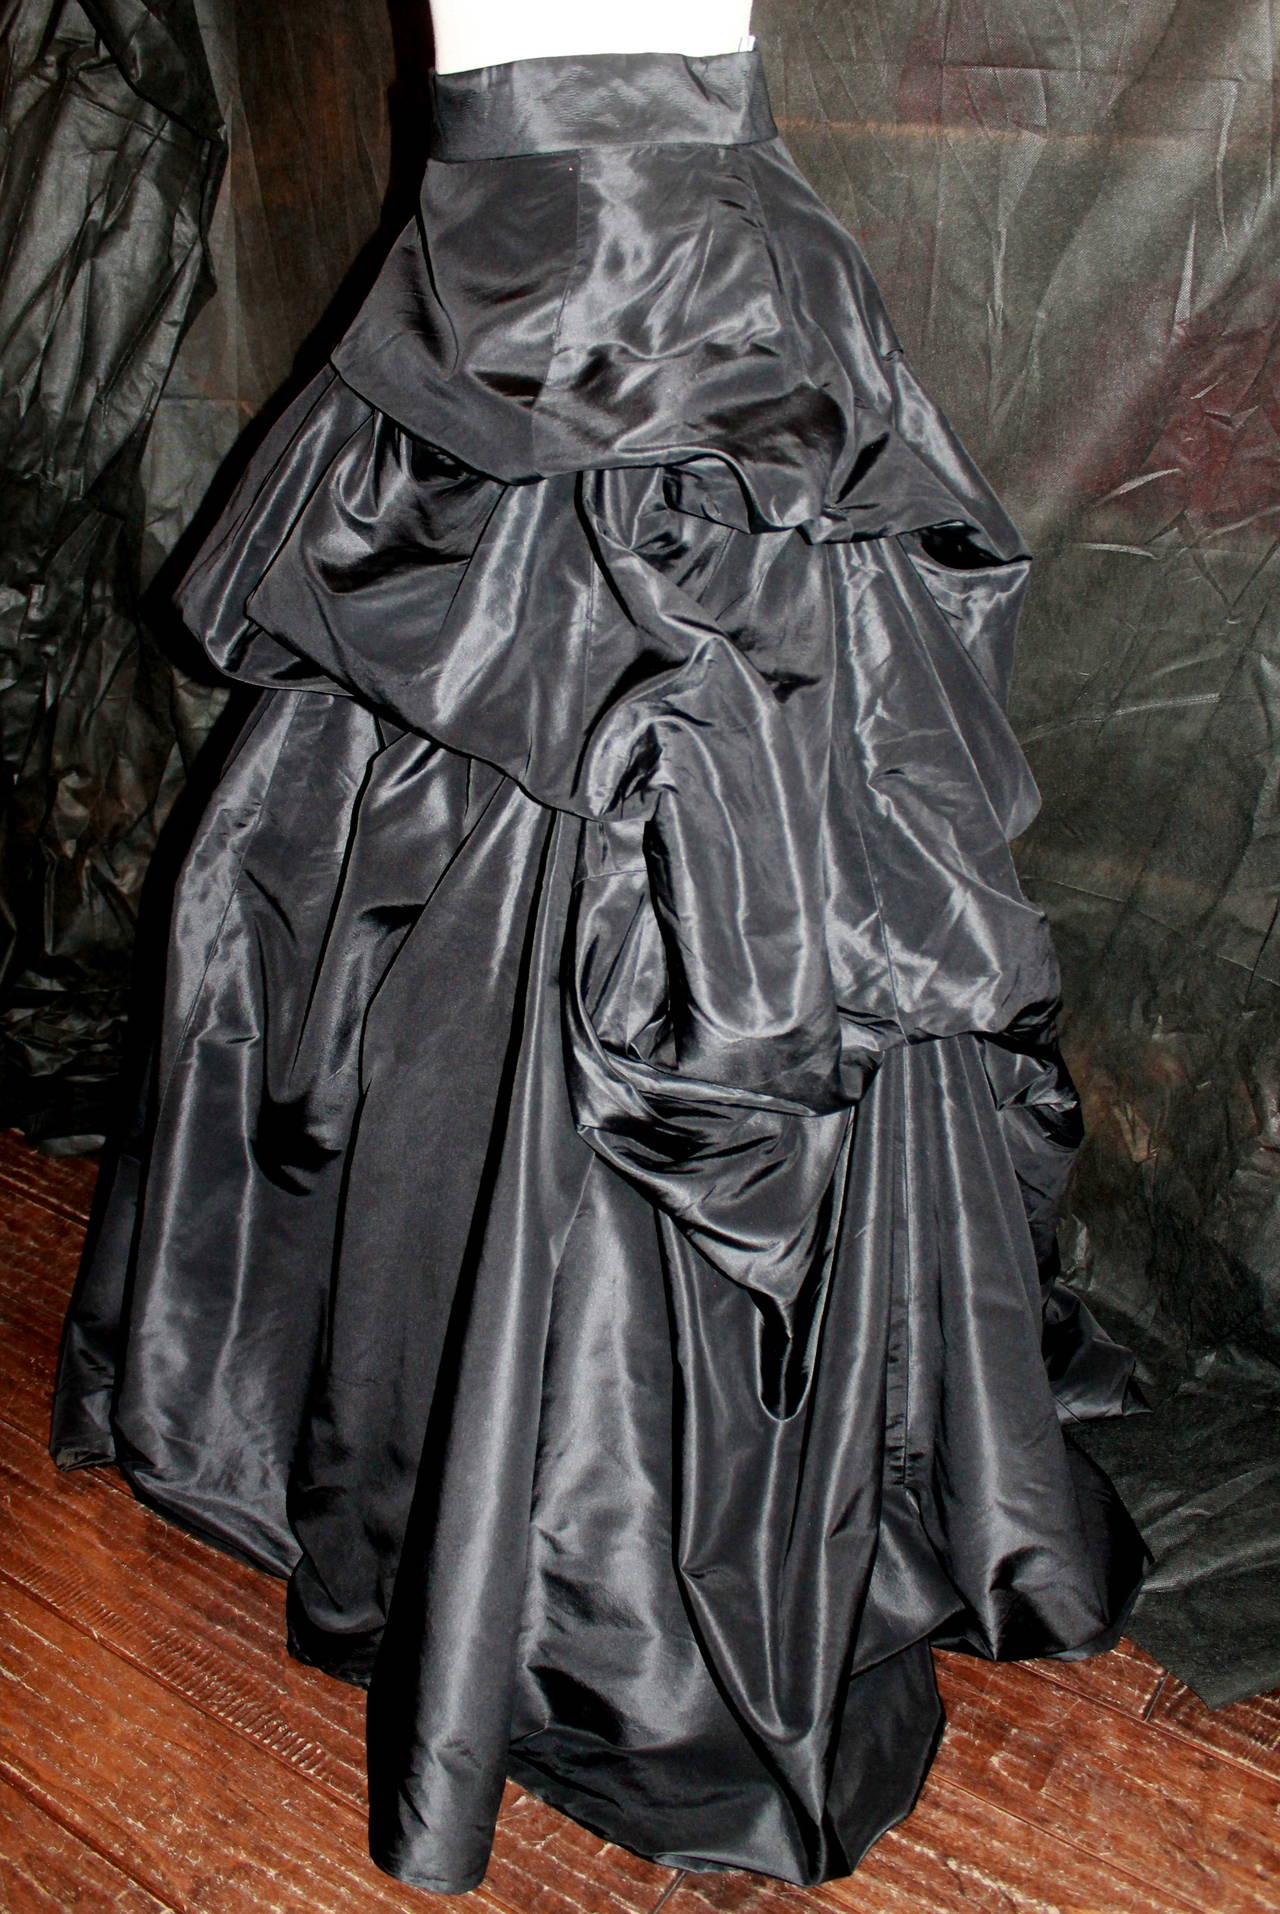 Monique Lhuillier Black Silk Taffeta Opera Skirt - 10. This skirt is in excellent condition and has a very intricate shape. 

Measurements:
Waist- 26.5